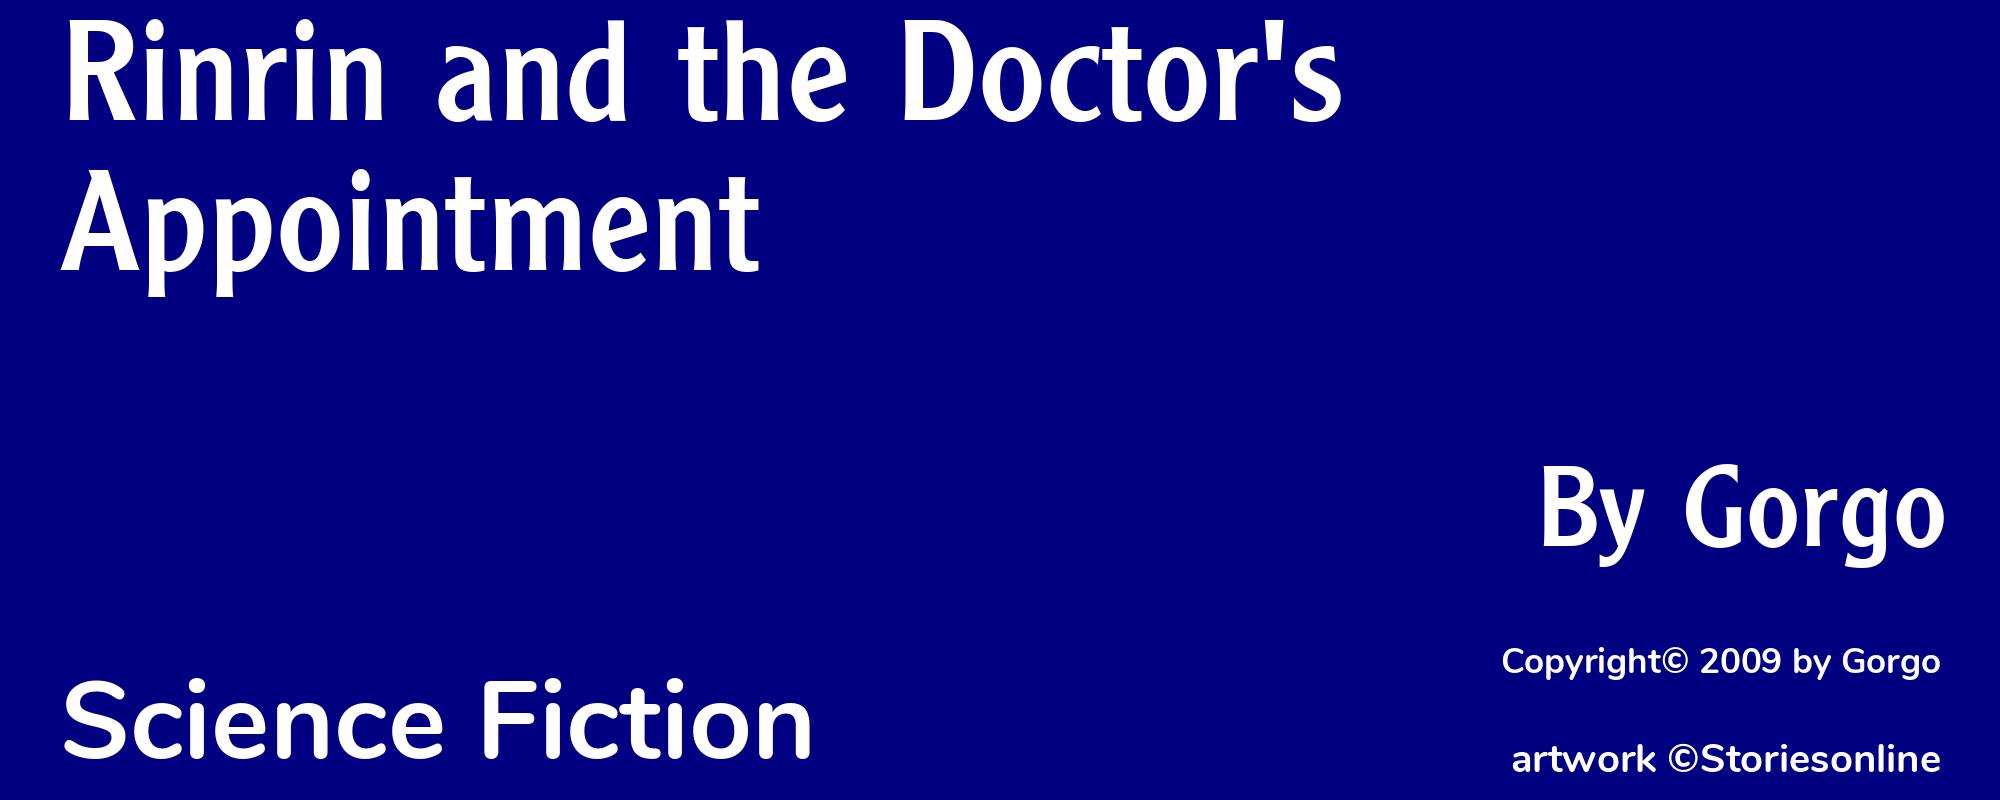 Rinrin and the Doctor's Appointment - Cover